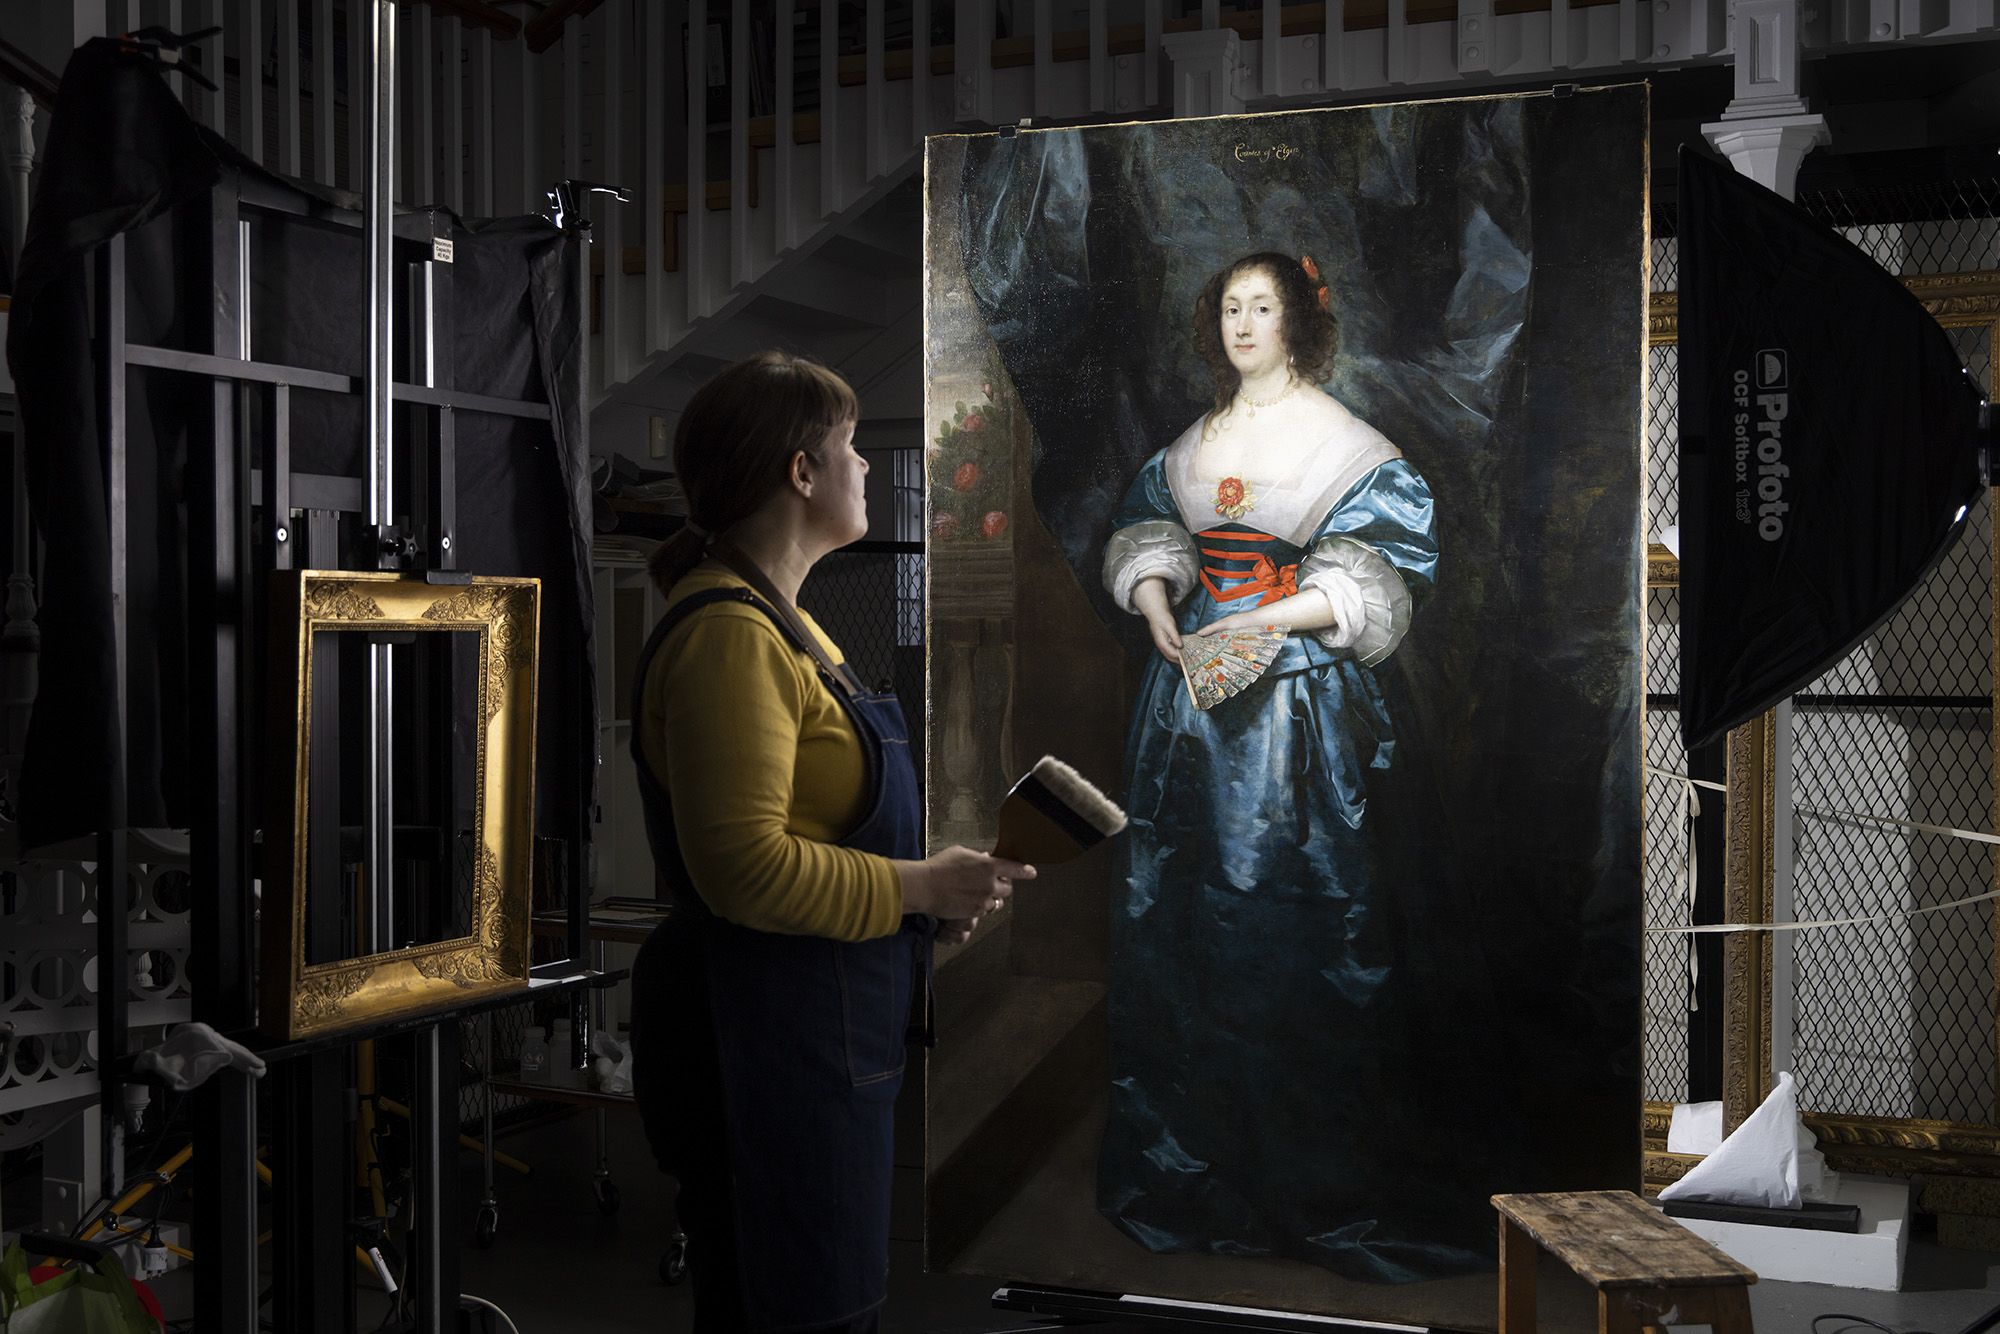 EMBARGOED 00.01 FRIDAY 24 NOVEMBER: English Heritage's paintings expert Alice Tate-Harte finishes conserving a painting of 17th-century noblewoman, Diana Cecil, as the charity revealed her true face after centuries of overpainting had hidden her features. During the conservation, it was discovered that much later re-touching had given Diana the Hollywood treatment, plumping her lips and lowering her hairline. After hours of painstaking conservation, Alice has removed the yellowing layer of old varnish to reveal Diana's true colours, as well as revealing her lips and hair as they were originally painted. Also revealed was the portrait's date of 1634 and the signature of artist Cornelius Johnson. The portrait of Diana Cecil goes on display at Kenwood, a neoclassical villa in London, on 30 November.